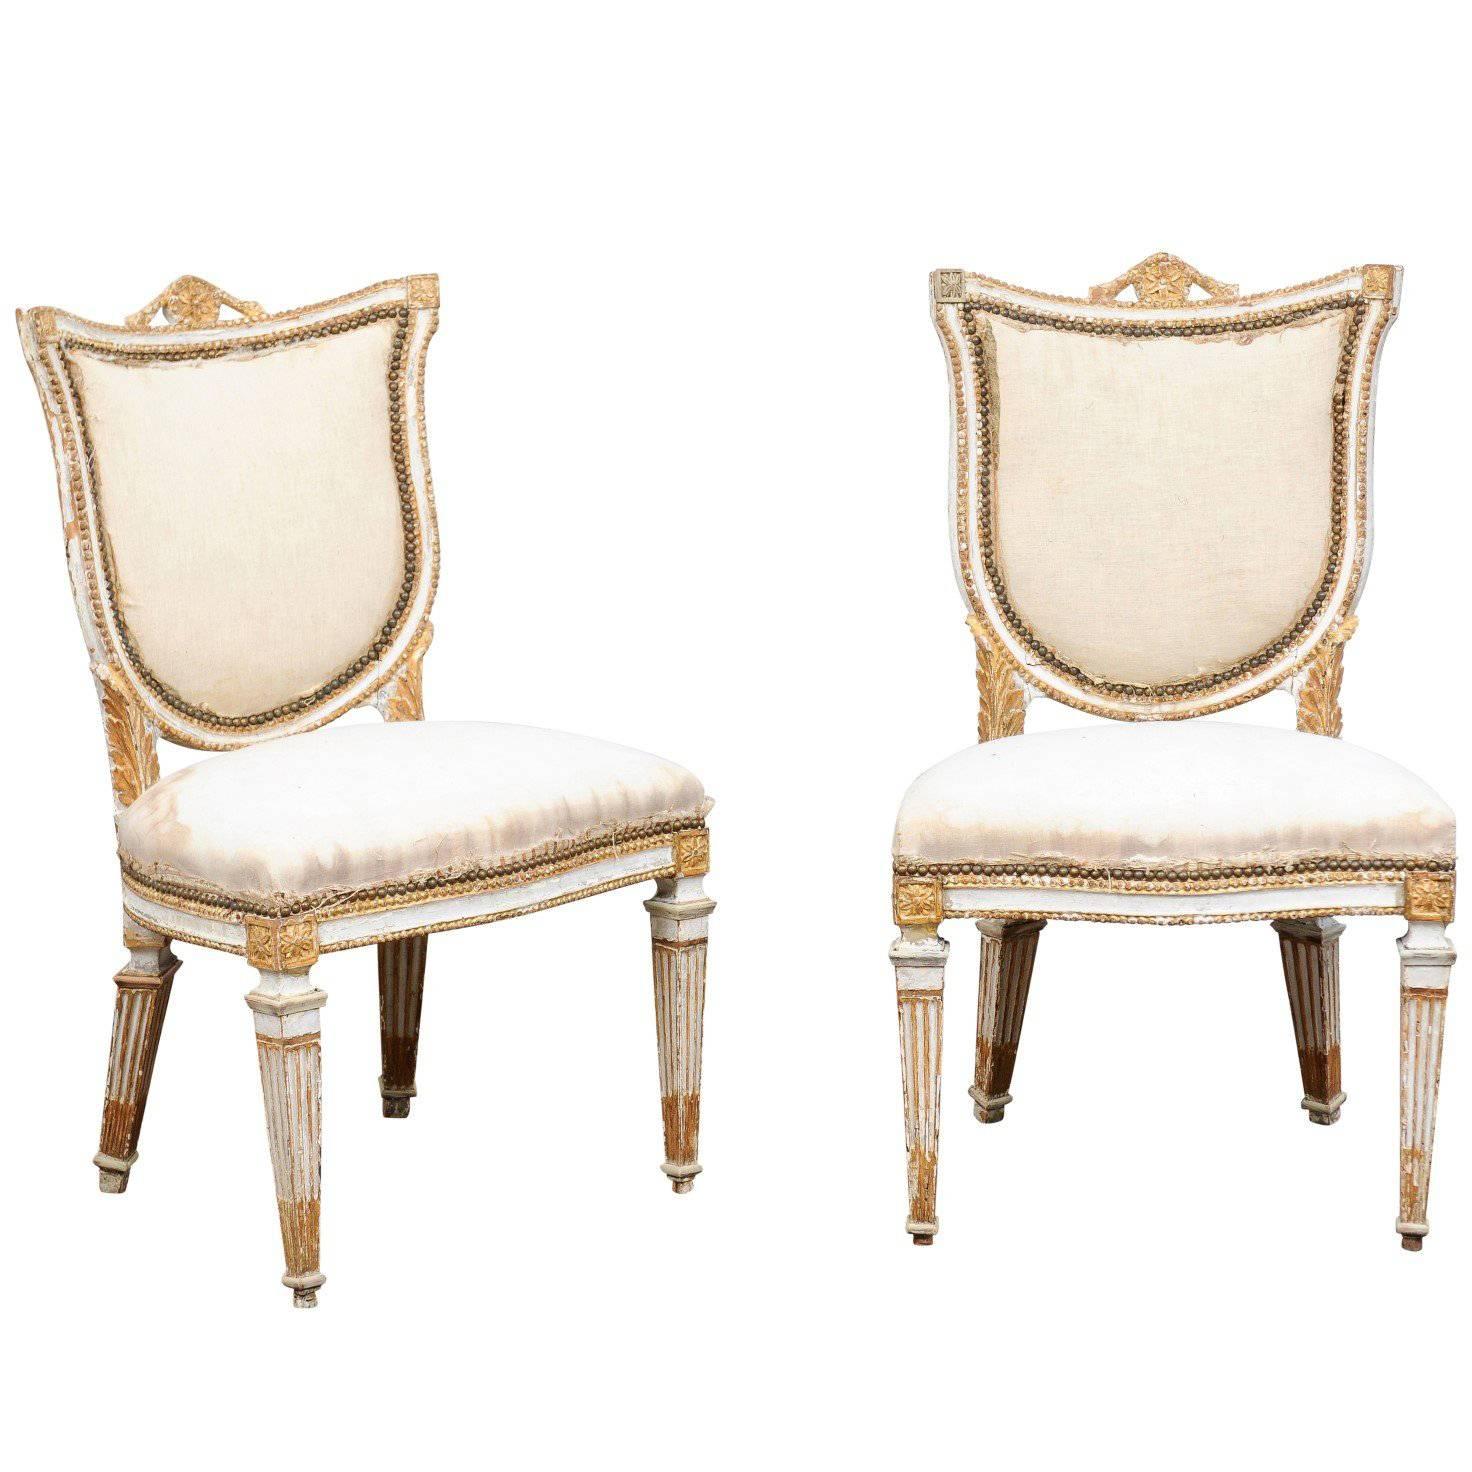 Pair of Italian Neoclassical Painted and Gilded Side Chairs with Shield Backs